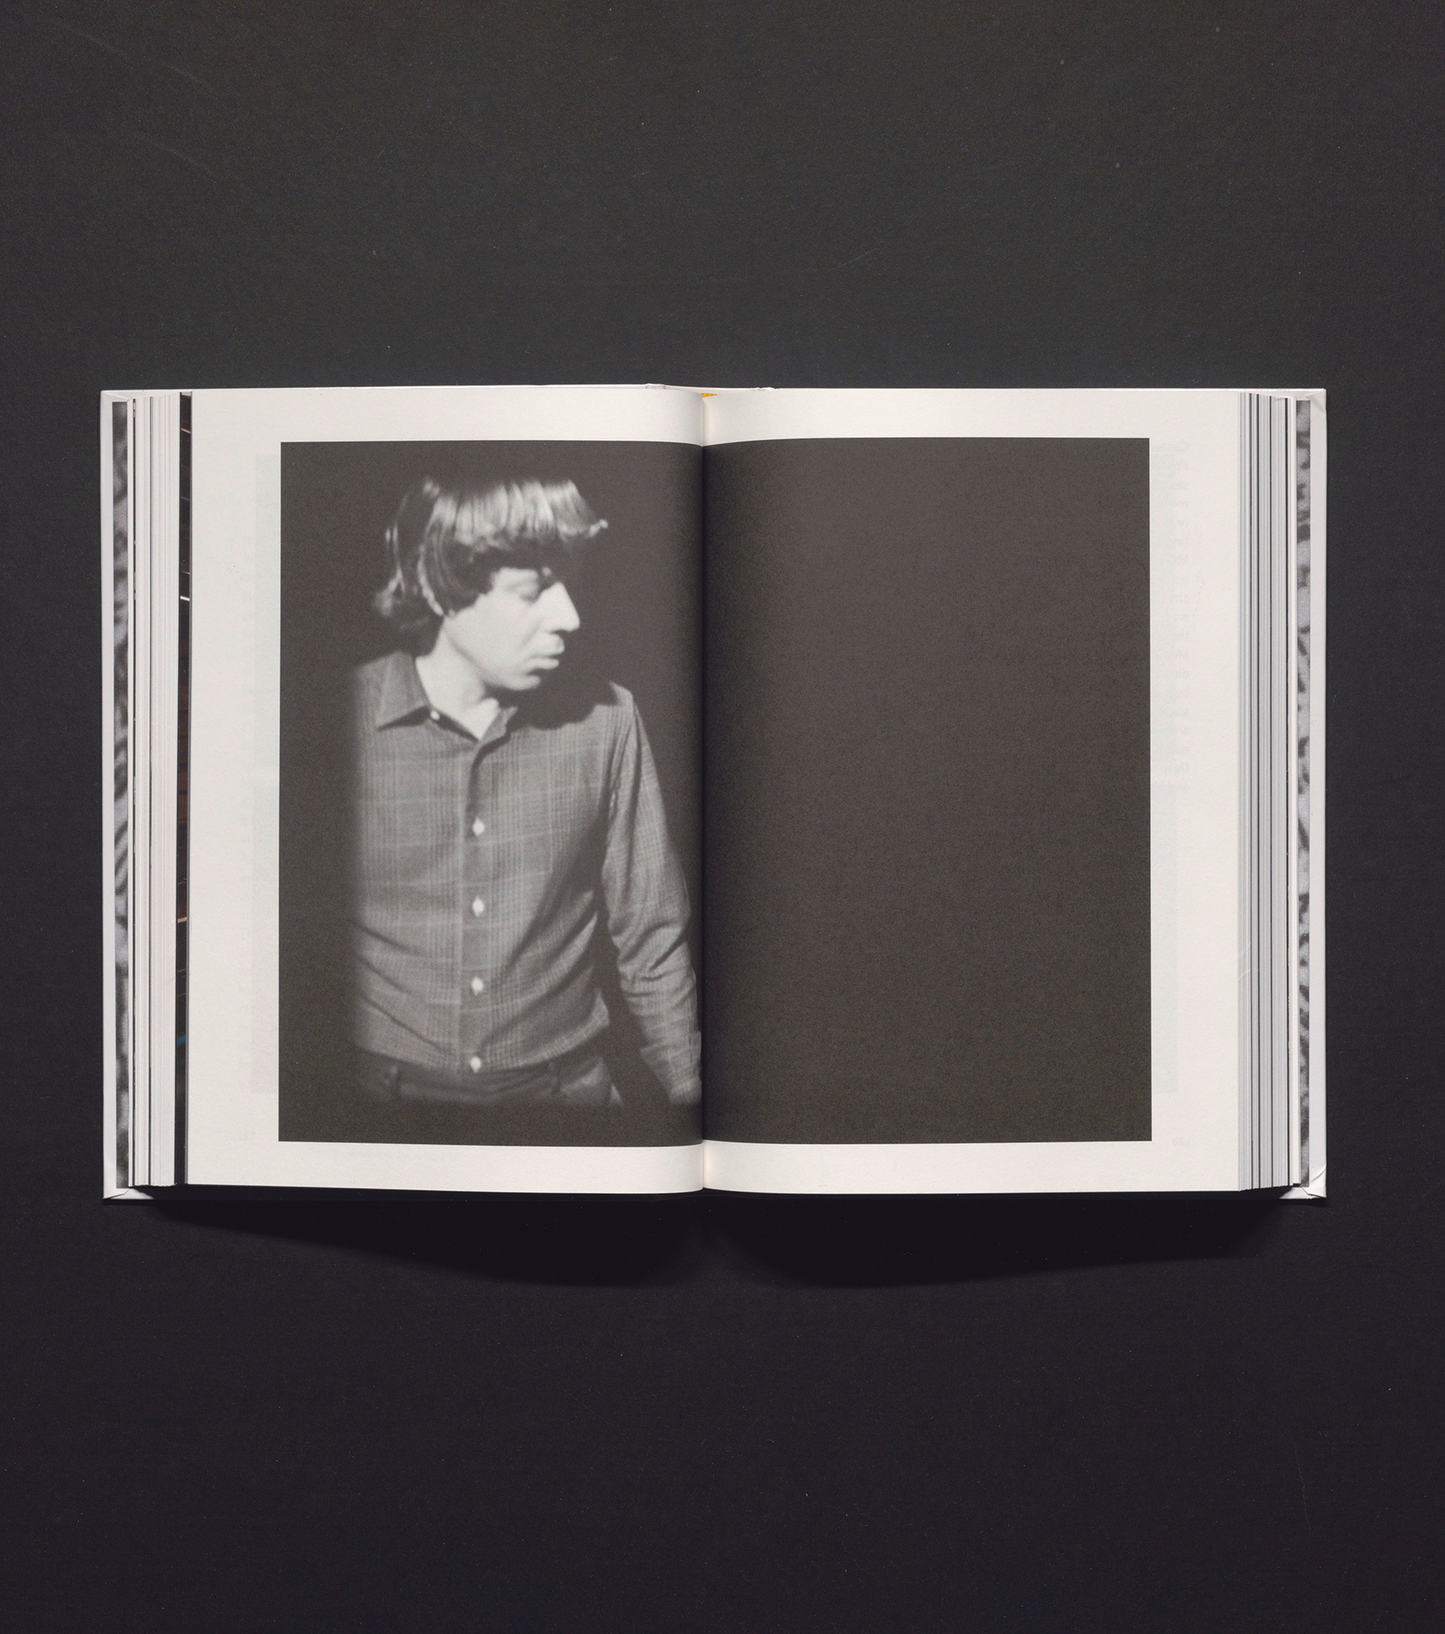 Joachim Koester - Of Spirits and Empty Spaces